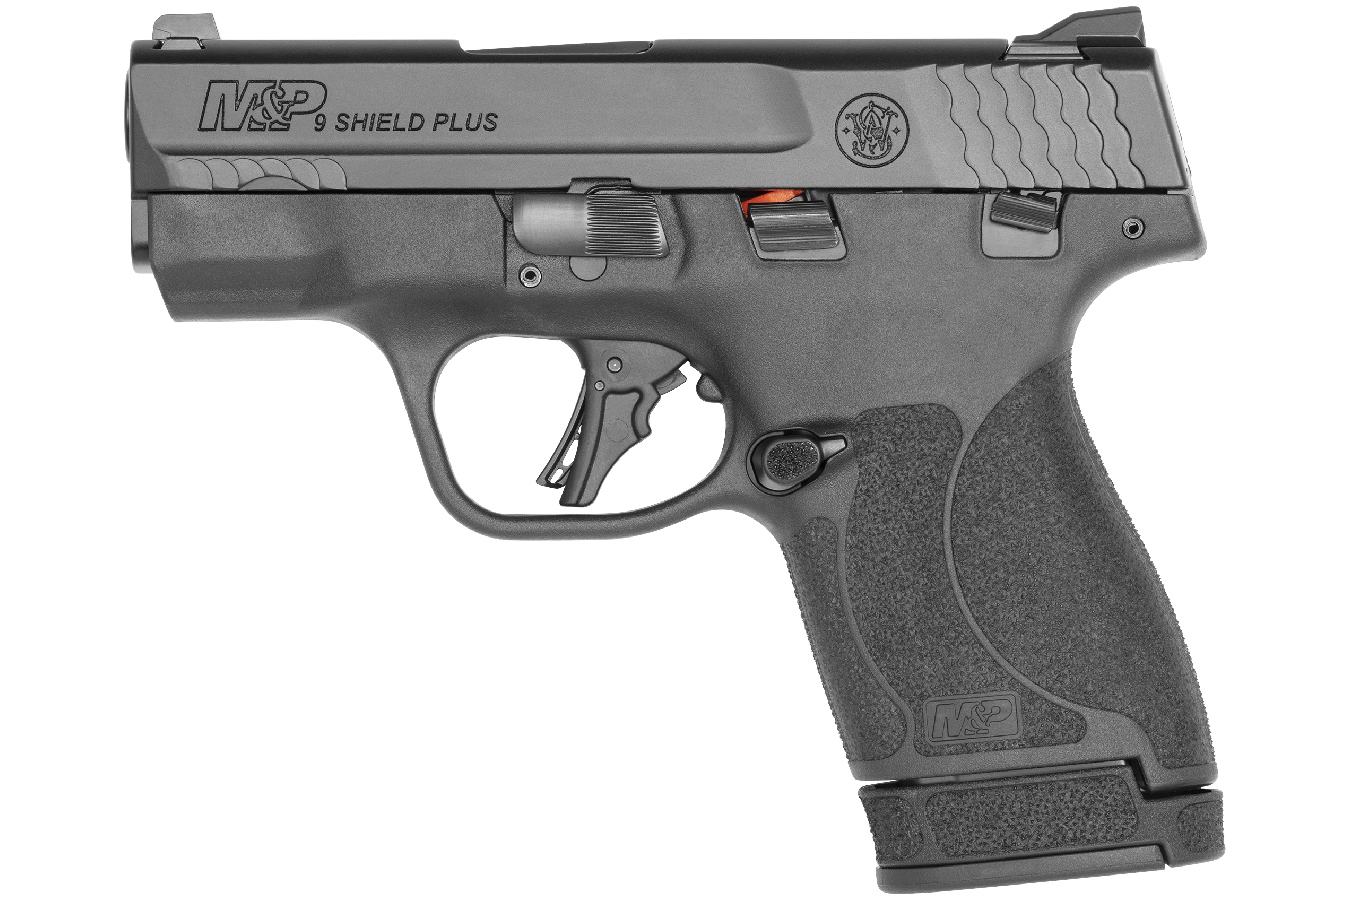 SMITH AND WESSON MP9 SHIELD PLUS 9MM MICRO COMPACT PISTOL WITH THUMB SAFETY